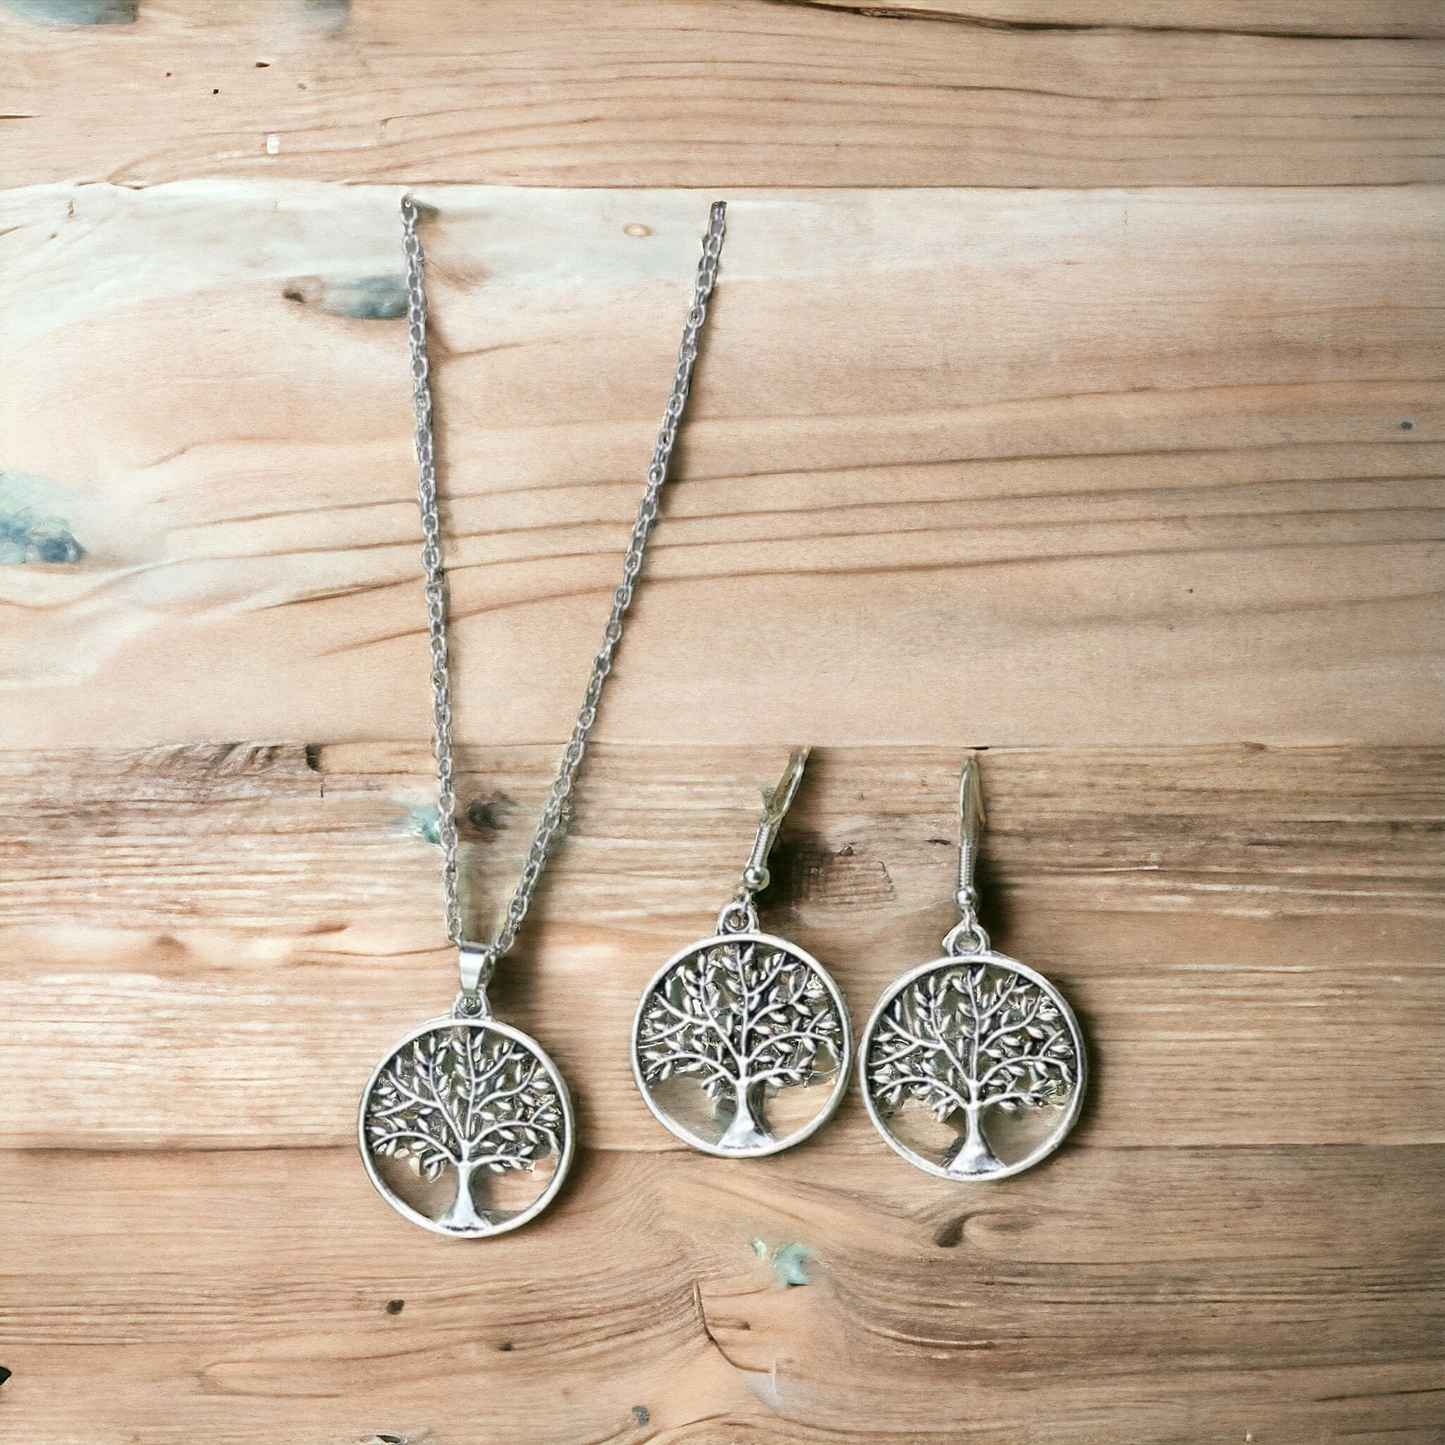 The tree of life necklace set